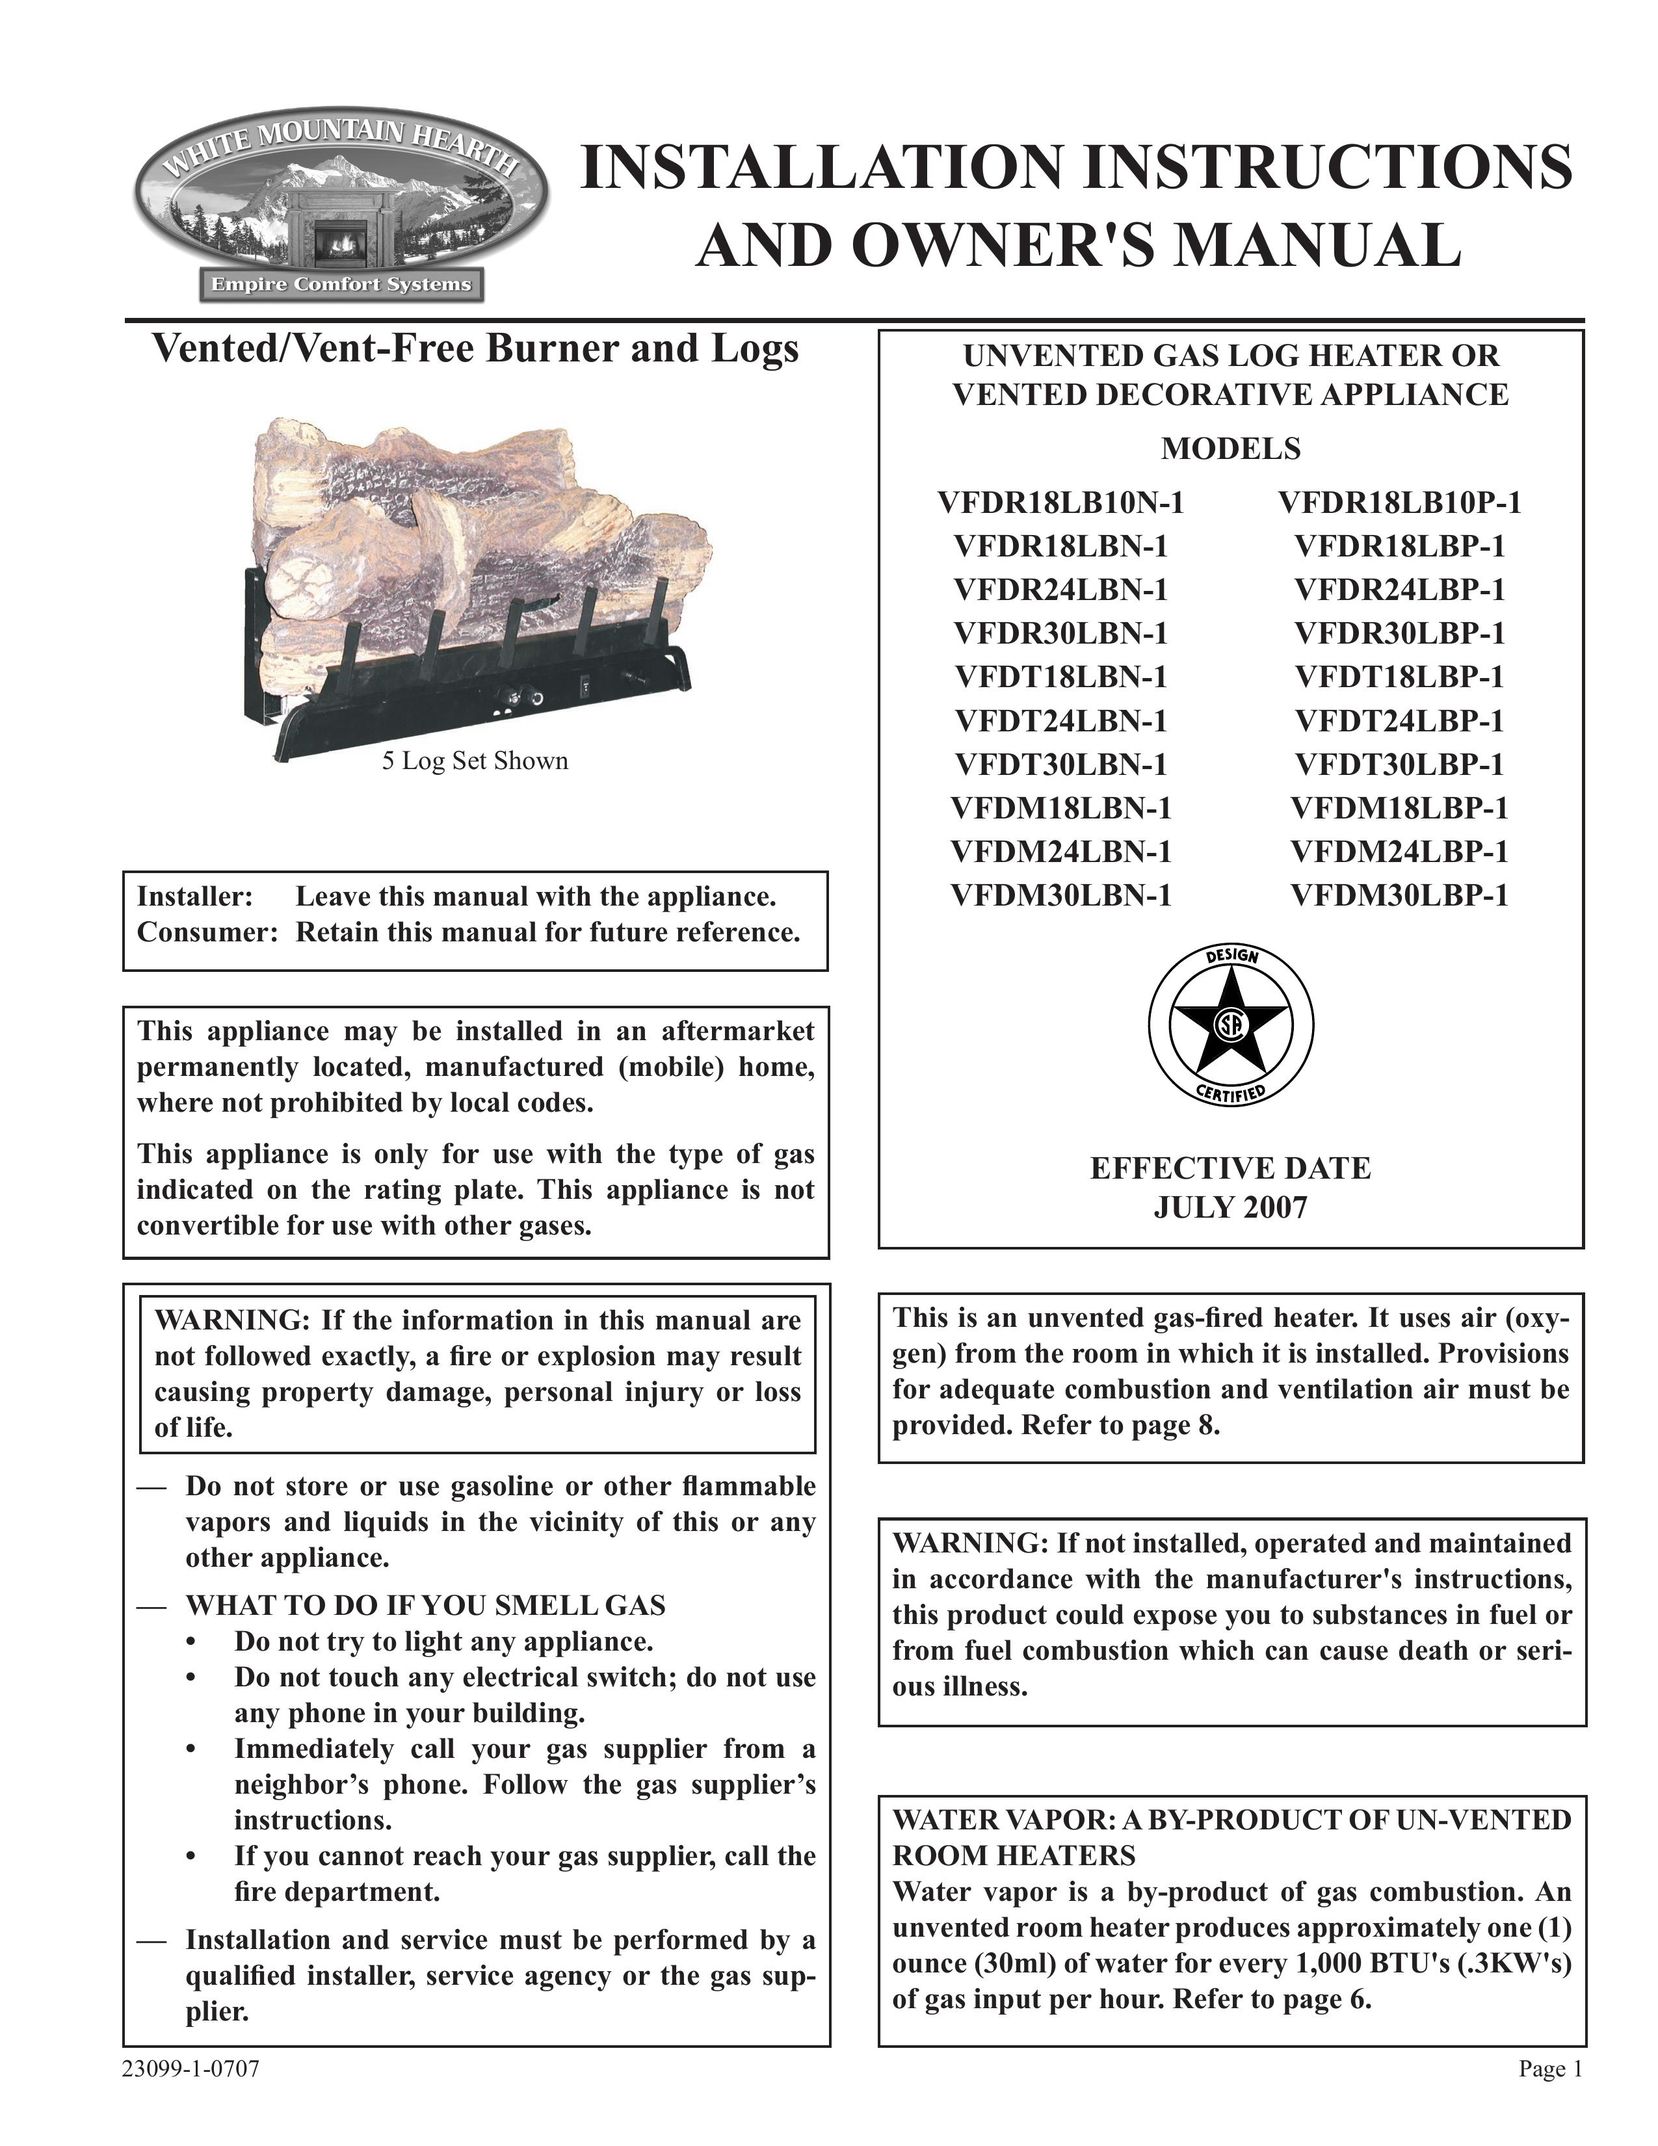 Empire Comfort Systems VFDR30LBP-1 Gas Heater User Manual